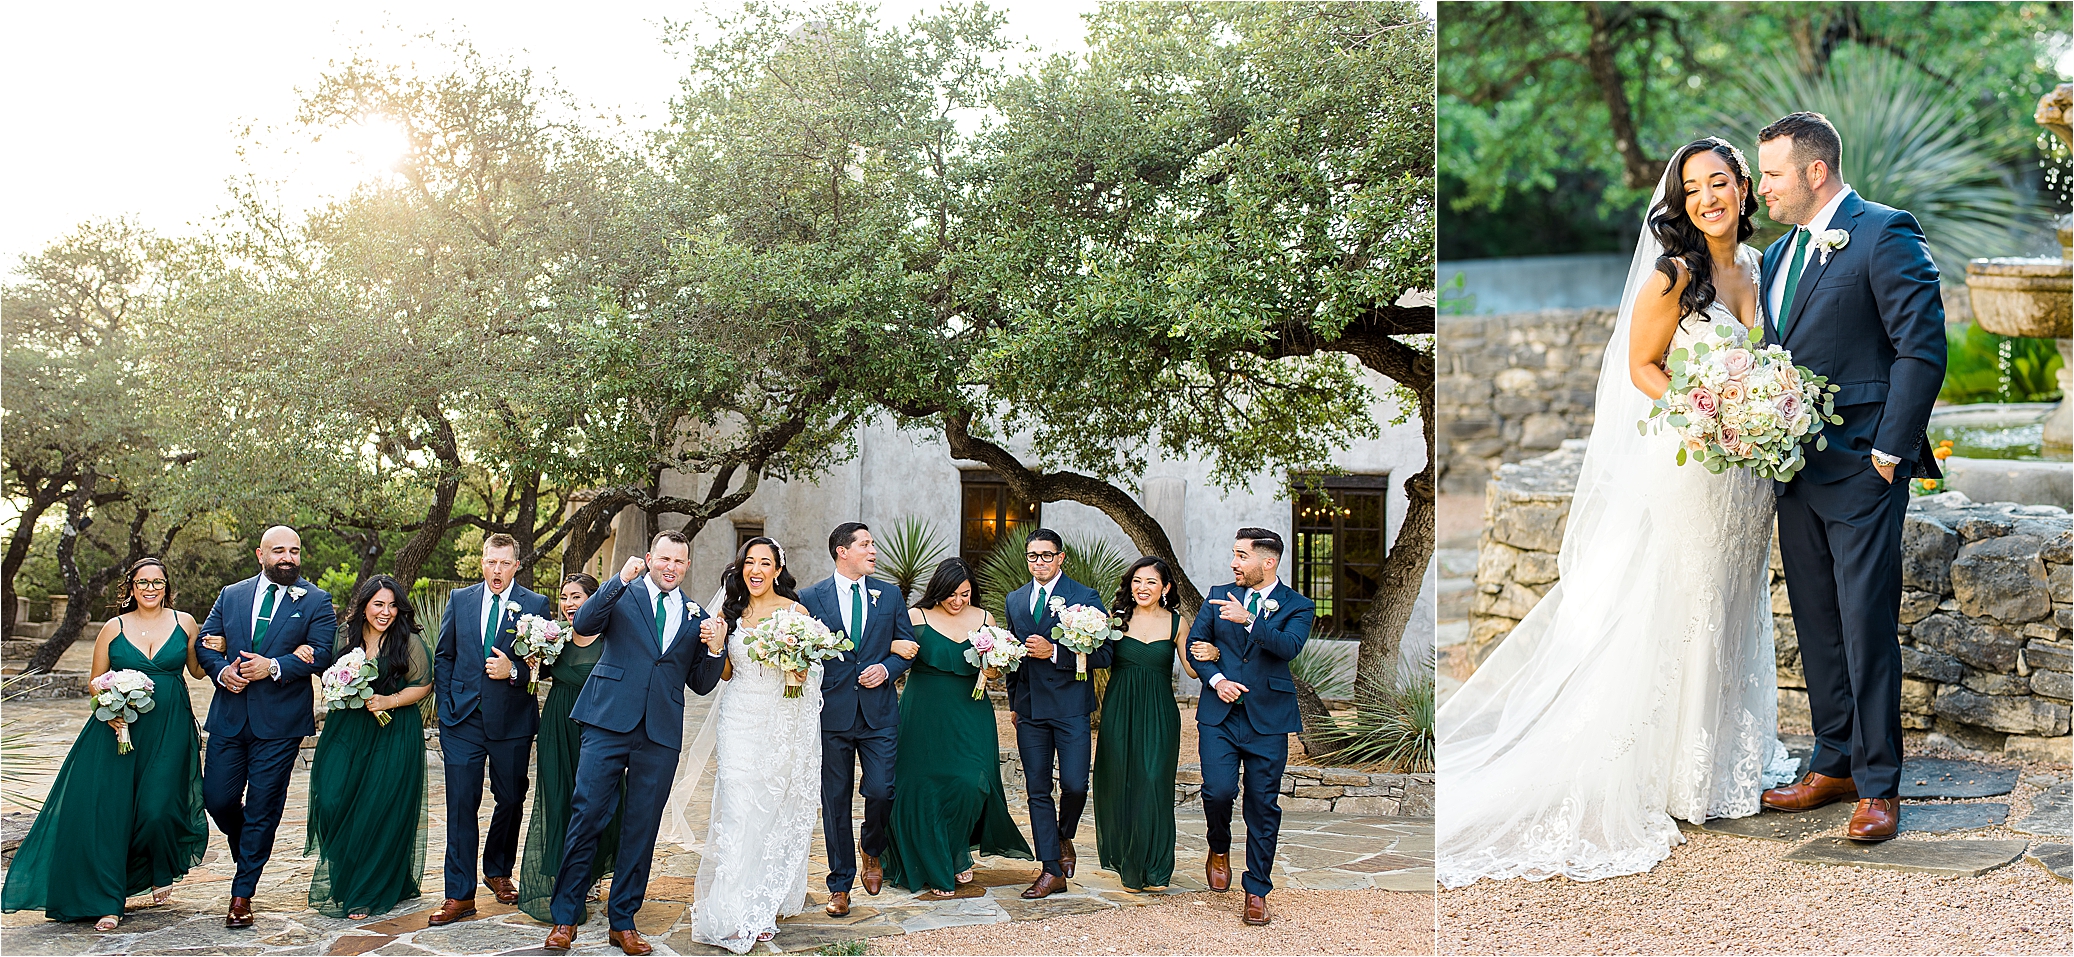 A bride and groom celebrate with their wedding party at Lost Mission, a wedding venue in The Texas Hill Country 